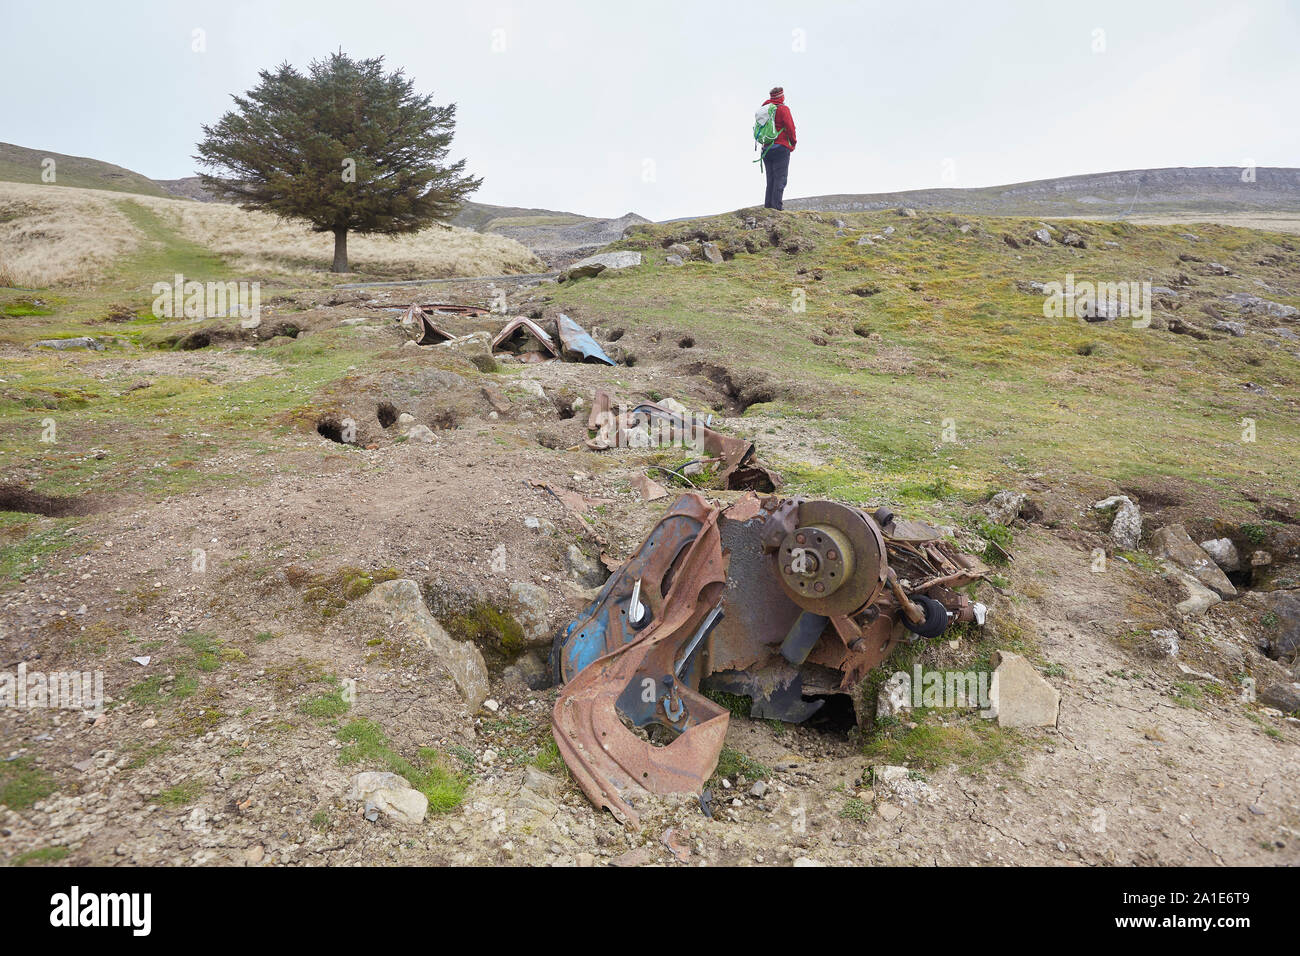 Abandoned remains of a vehicle and scrap metal near the old lead mines on Oxclose Road, Ivy Scar, between Woodhall and Carperby, Yorkshire Dales Natio Stock Photo